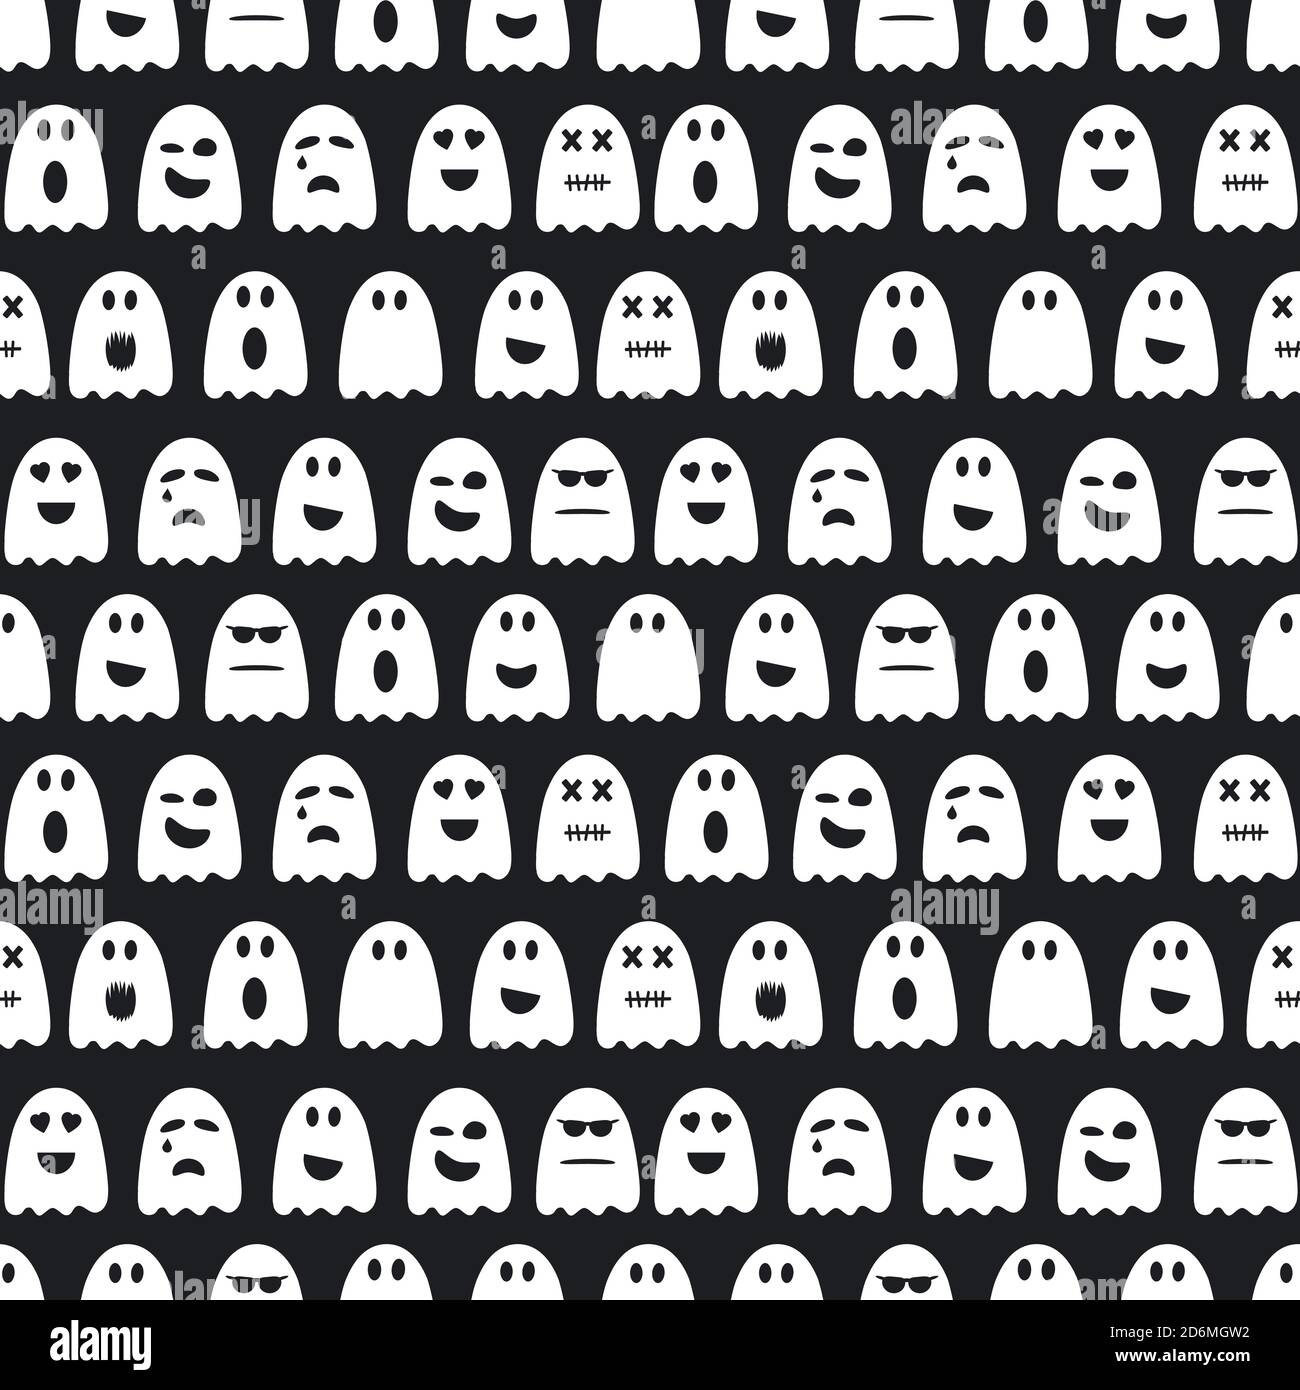 Halloween vector seamless pattern with ghosts Stock Vector